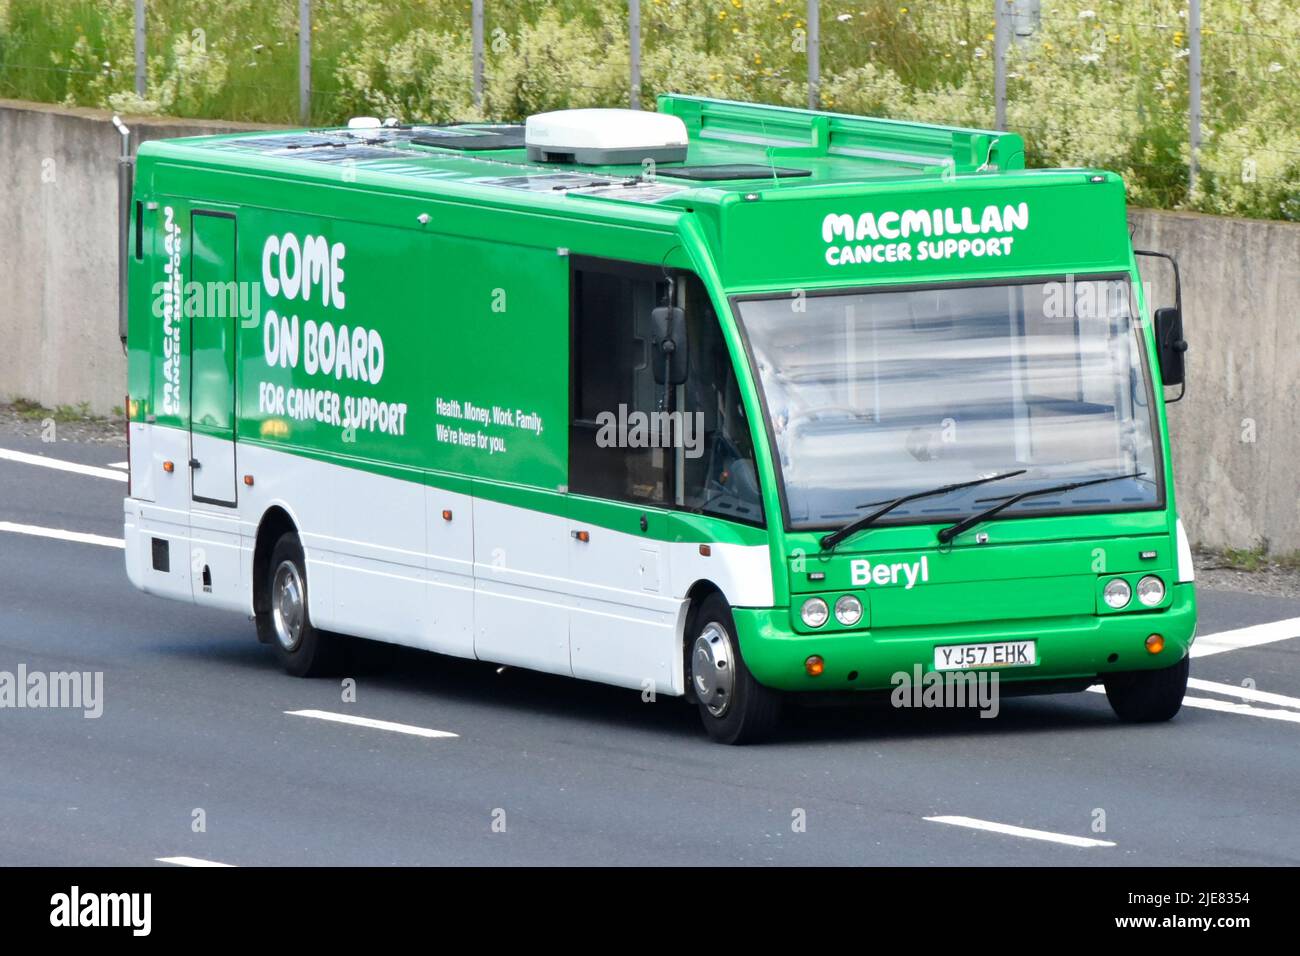 The Macmillan cancer charity & support from a mobile travelling 'Come on Board' help exhibition bus in trademark green driving on UK motorway road Stock Photo